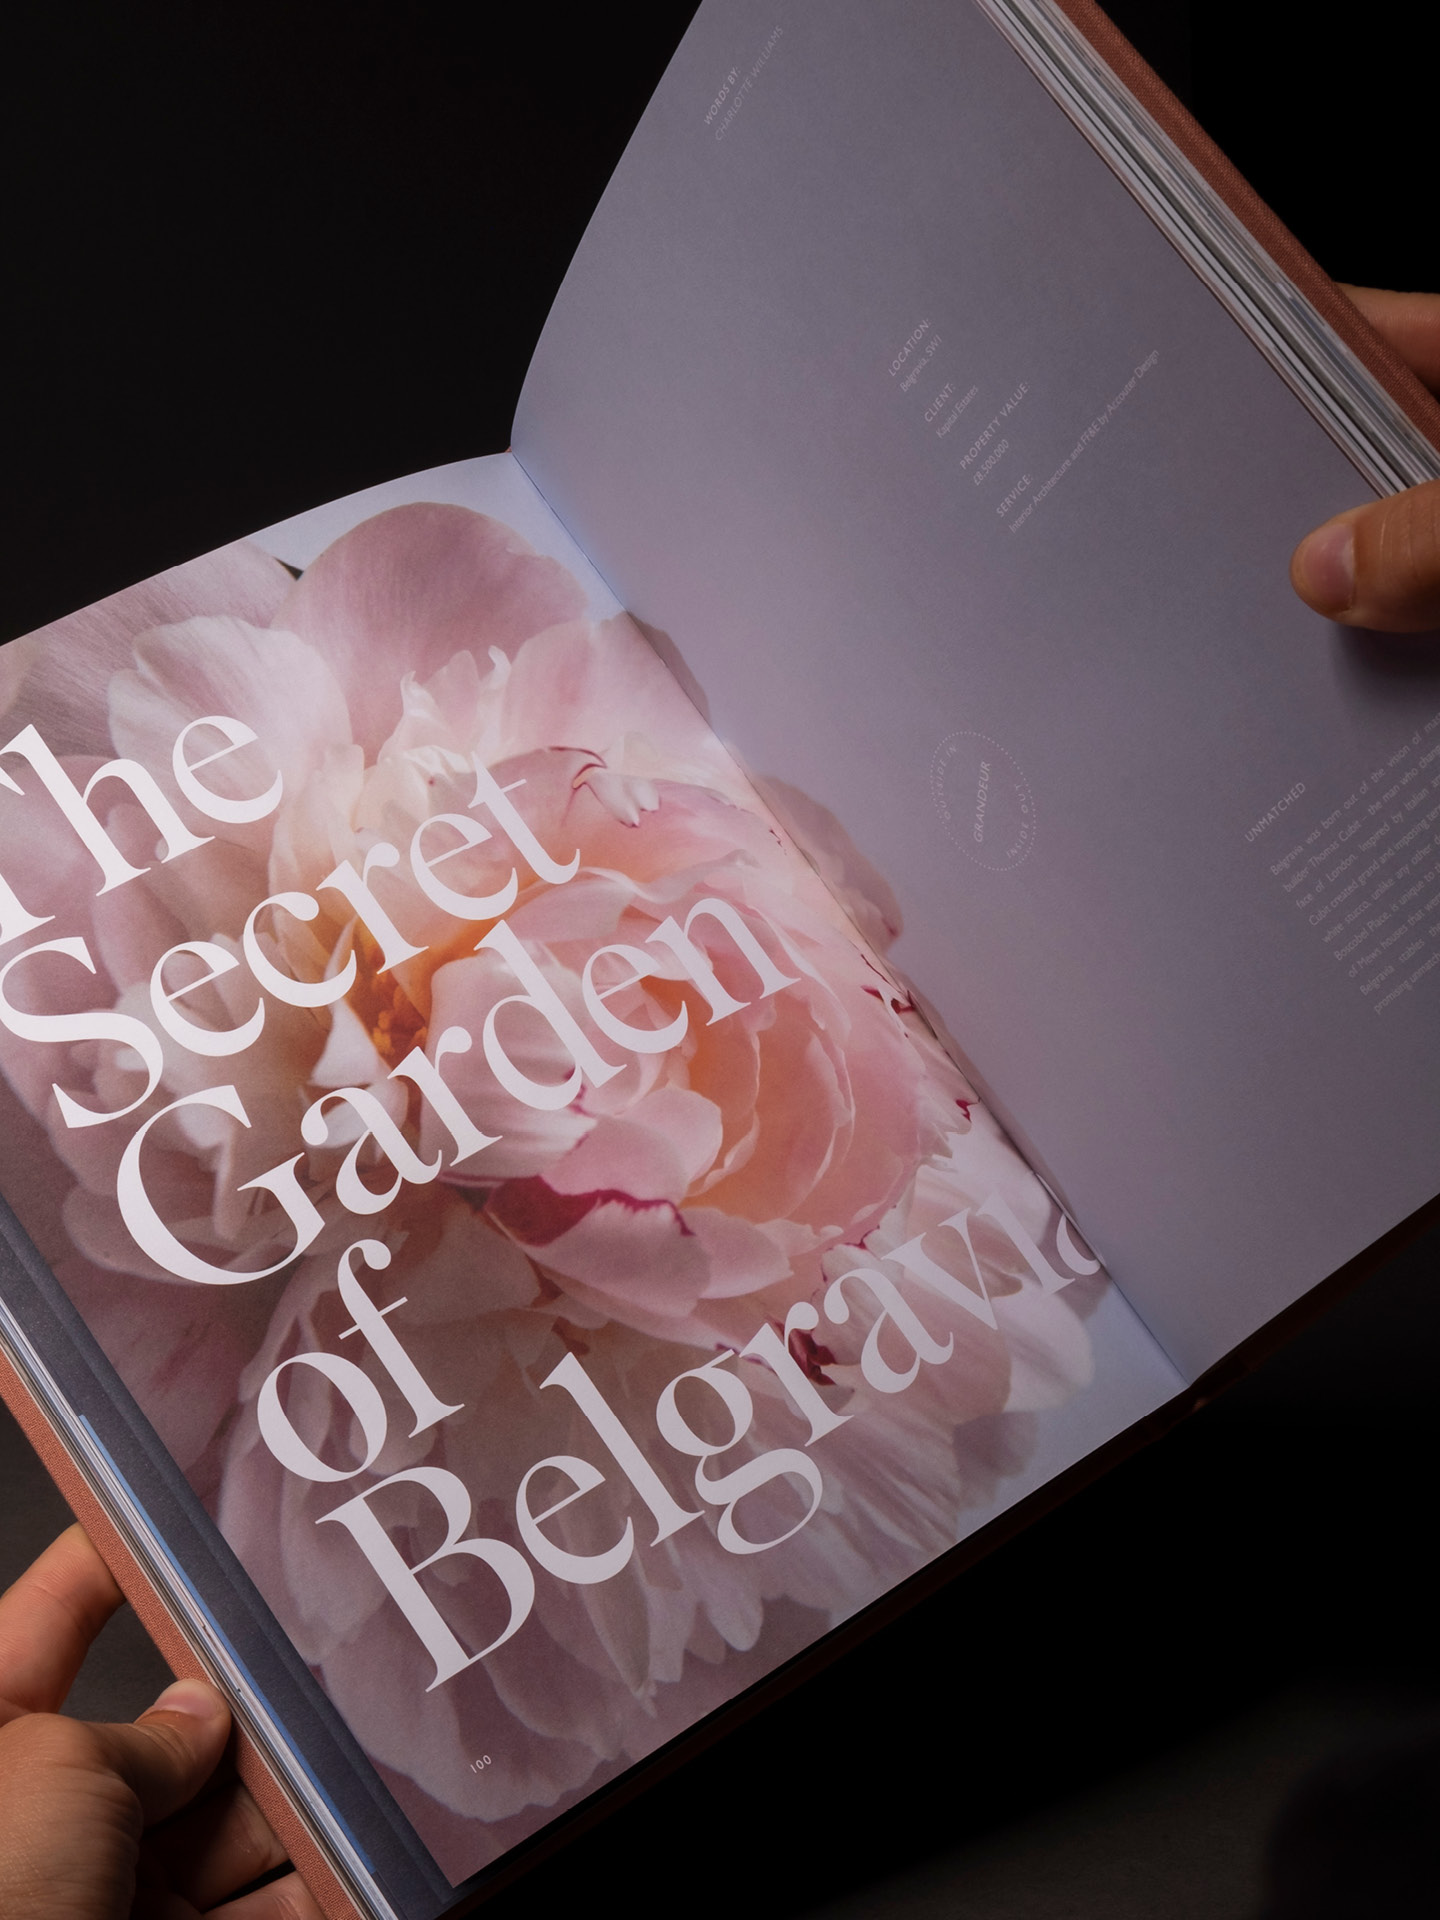 Printed spread from the Accouter Four annual showcasing the secret garden of Belgravia project